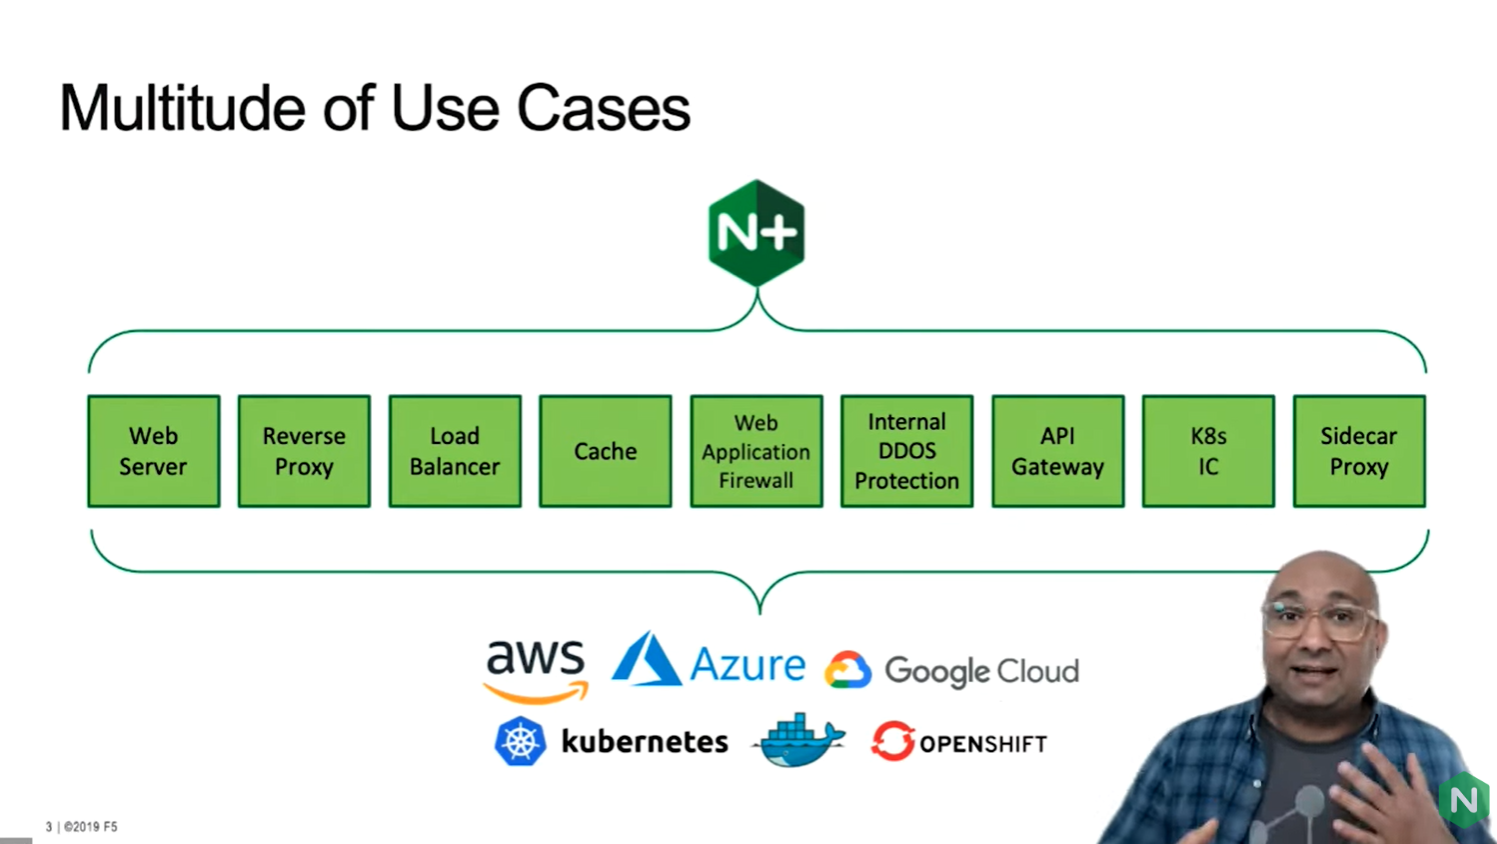 Use cases for NGINX open source and NGINX+ servers